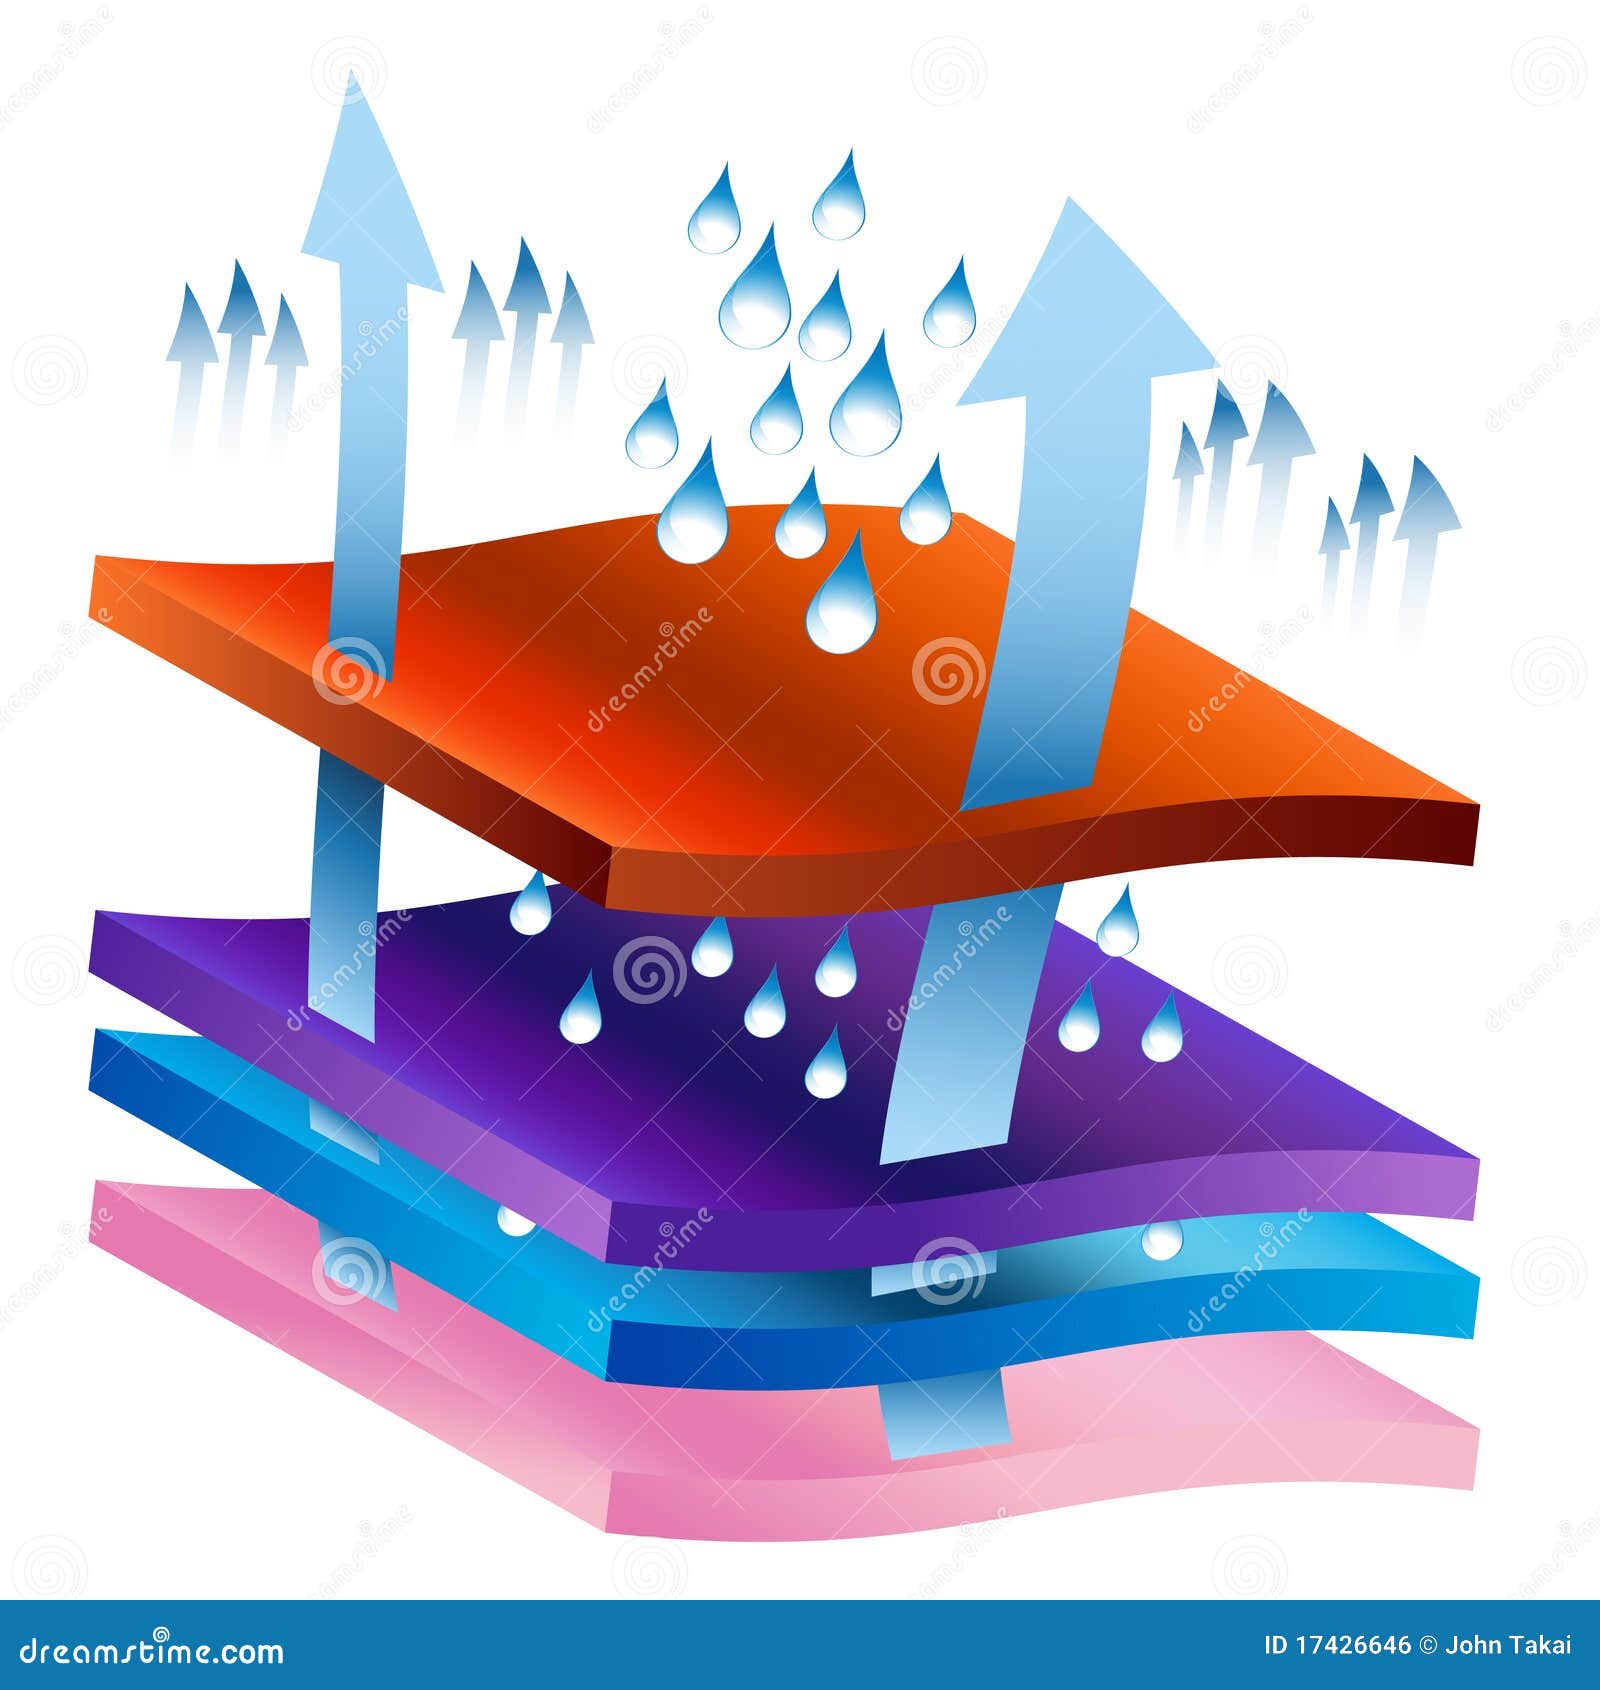 Moisture Wicking Process Chart Stock Vector - Illustration of icon,  clipart: 17426646